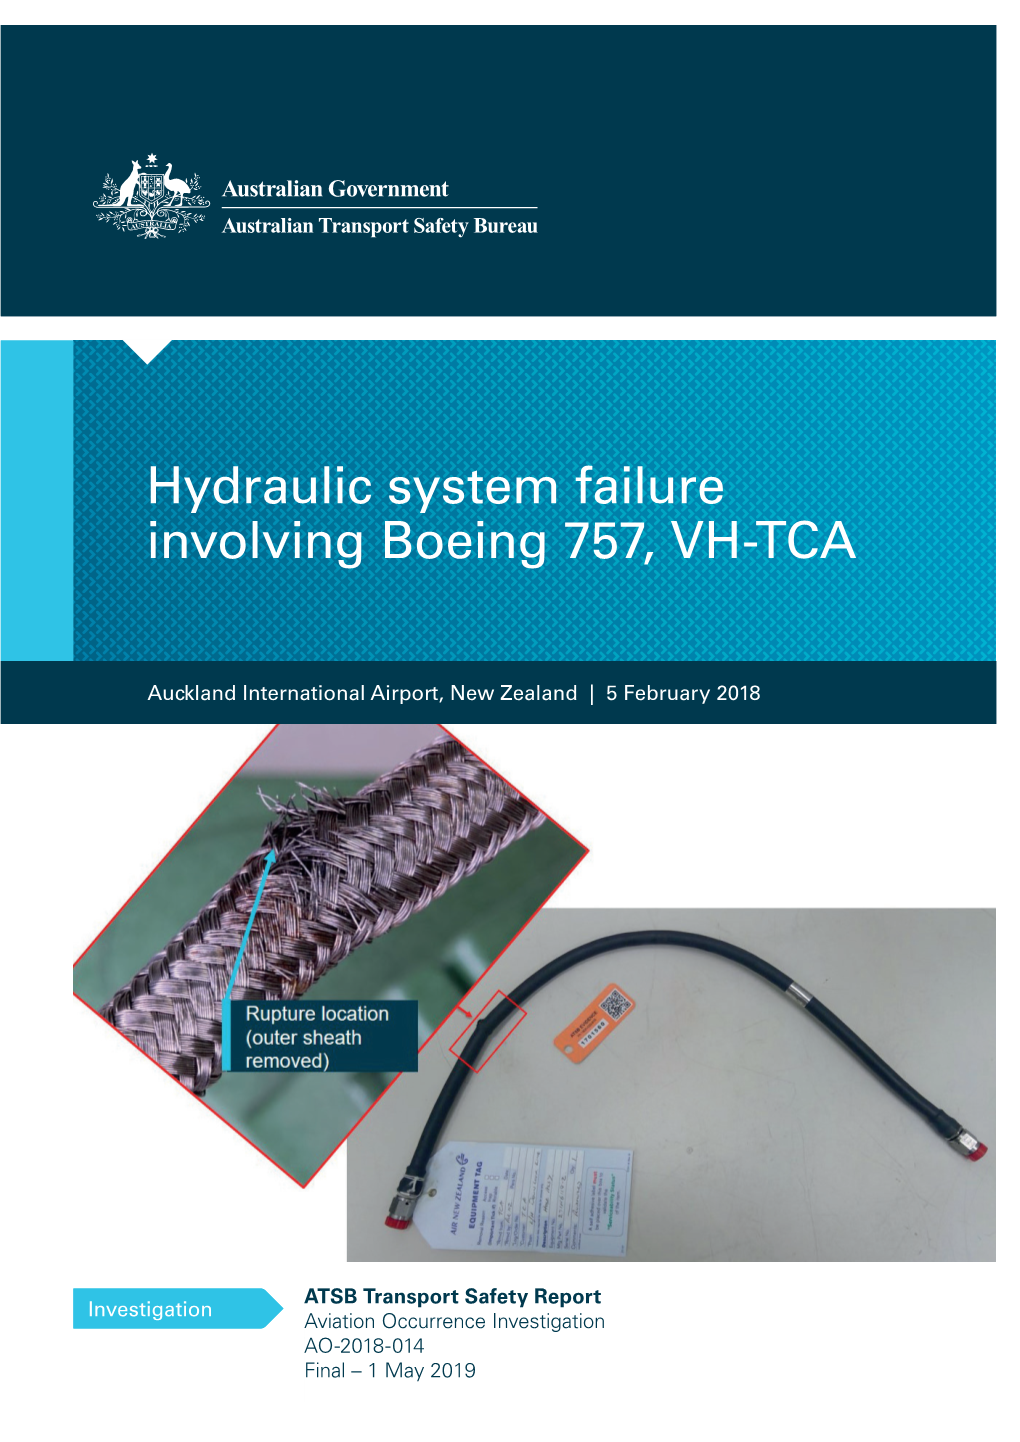 Hydraulic System Failure Involving Boeing 757, VH-TCA, Auckland International Airport, New Zealand on 5 February 2018